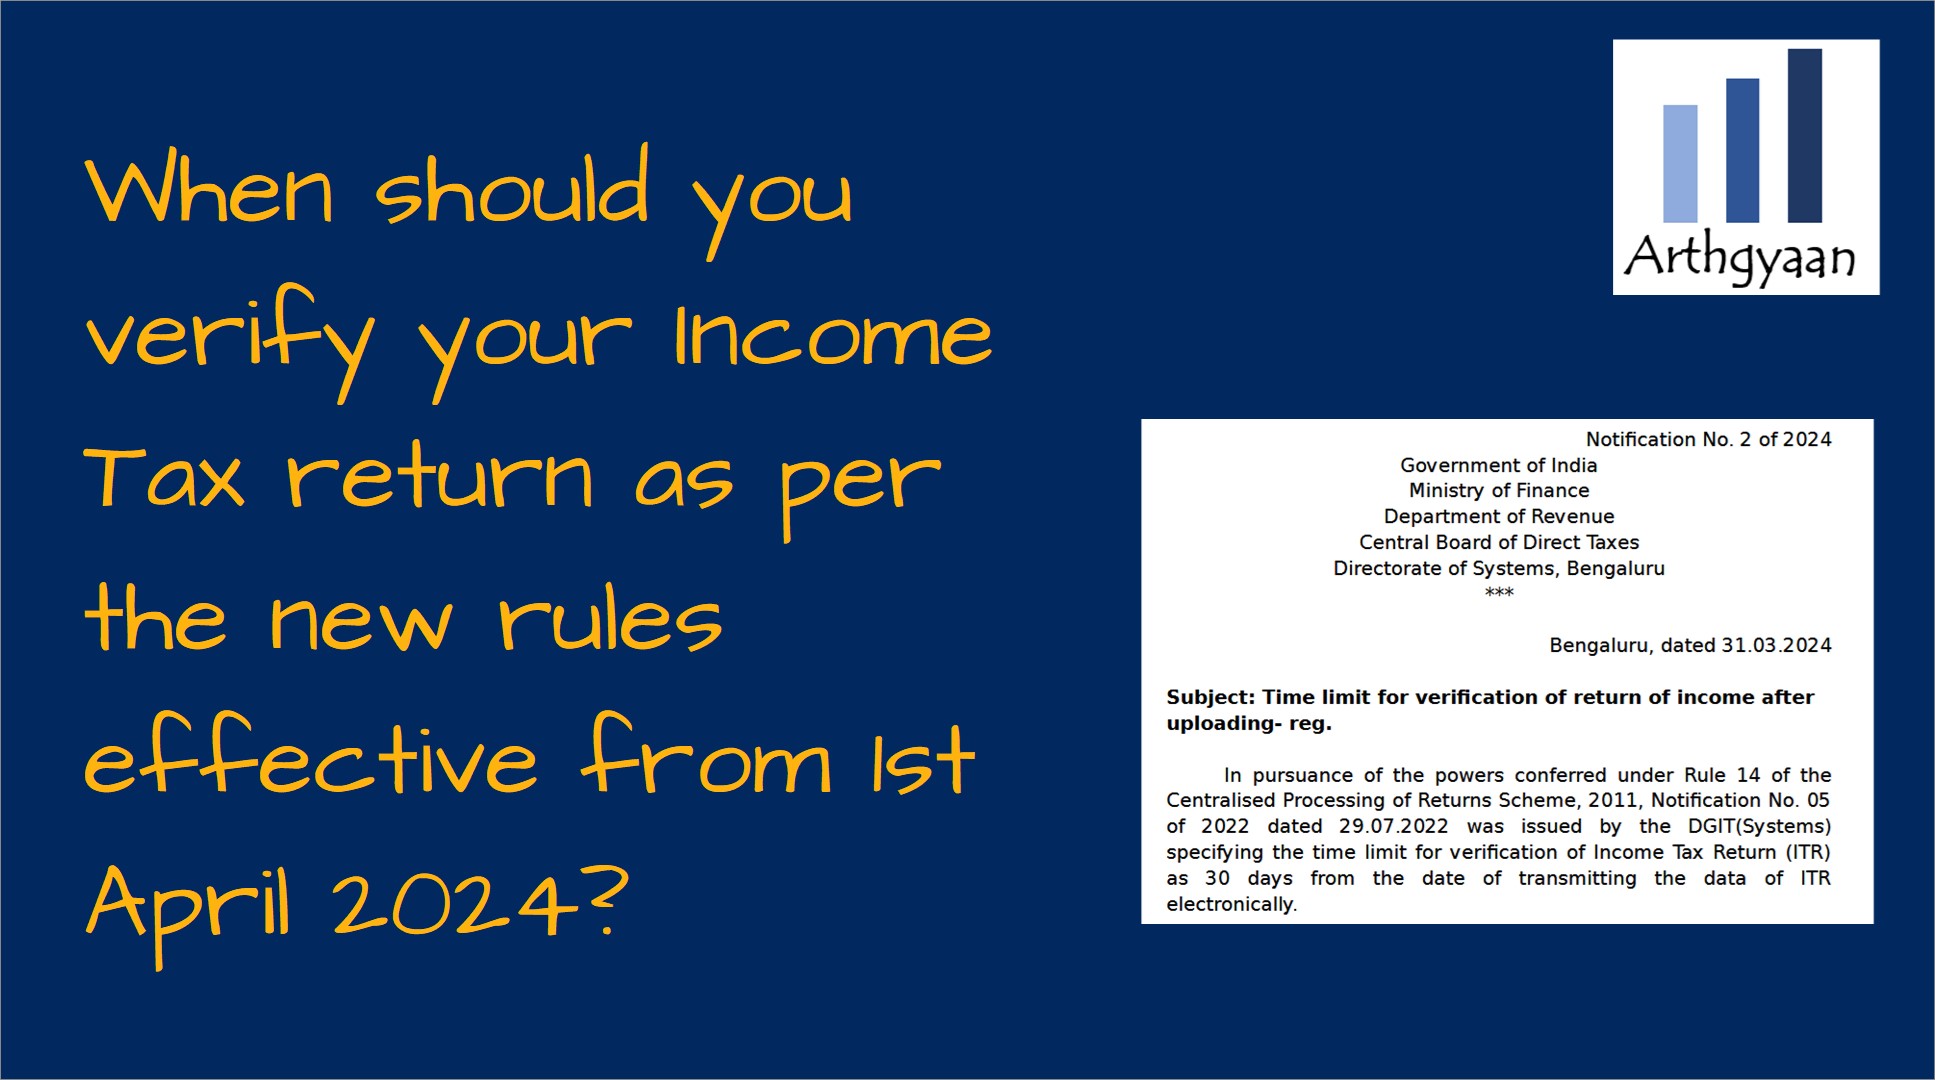 When should you verify your Income Tax return as per the new rules effective from 1st April 2024?